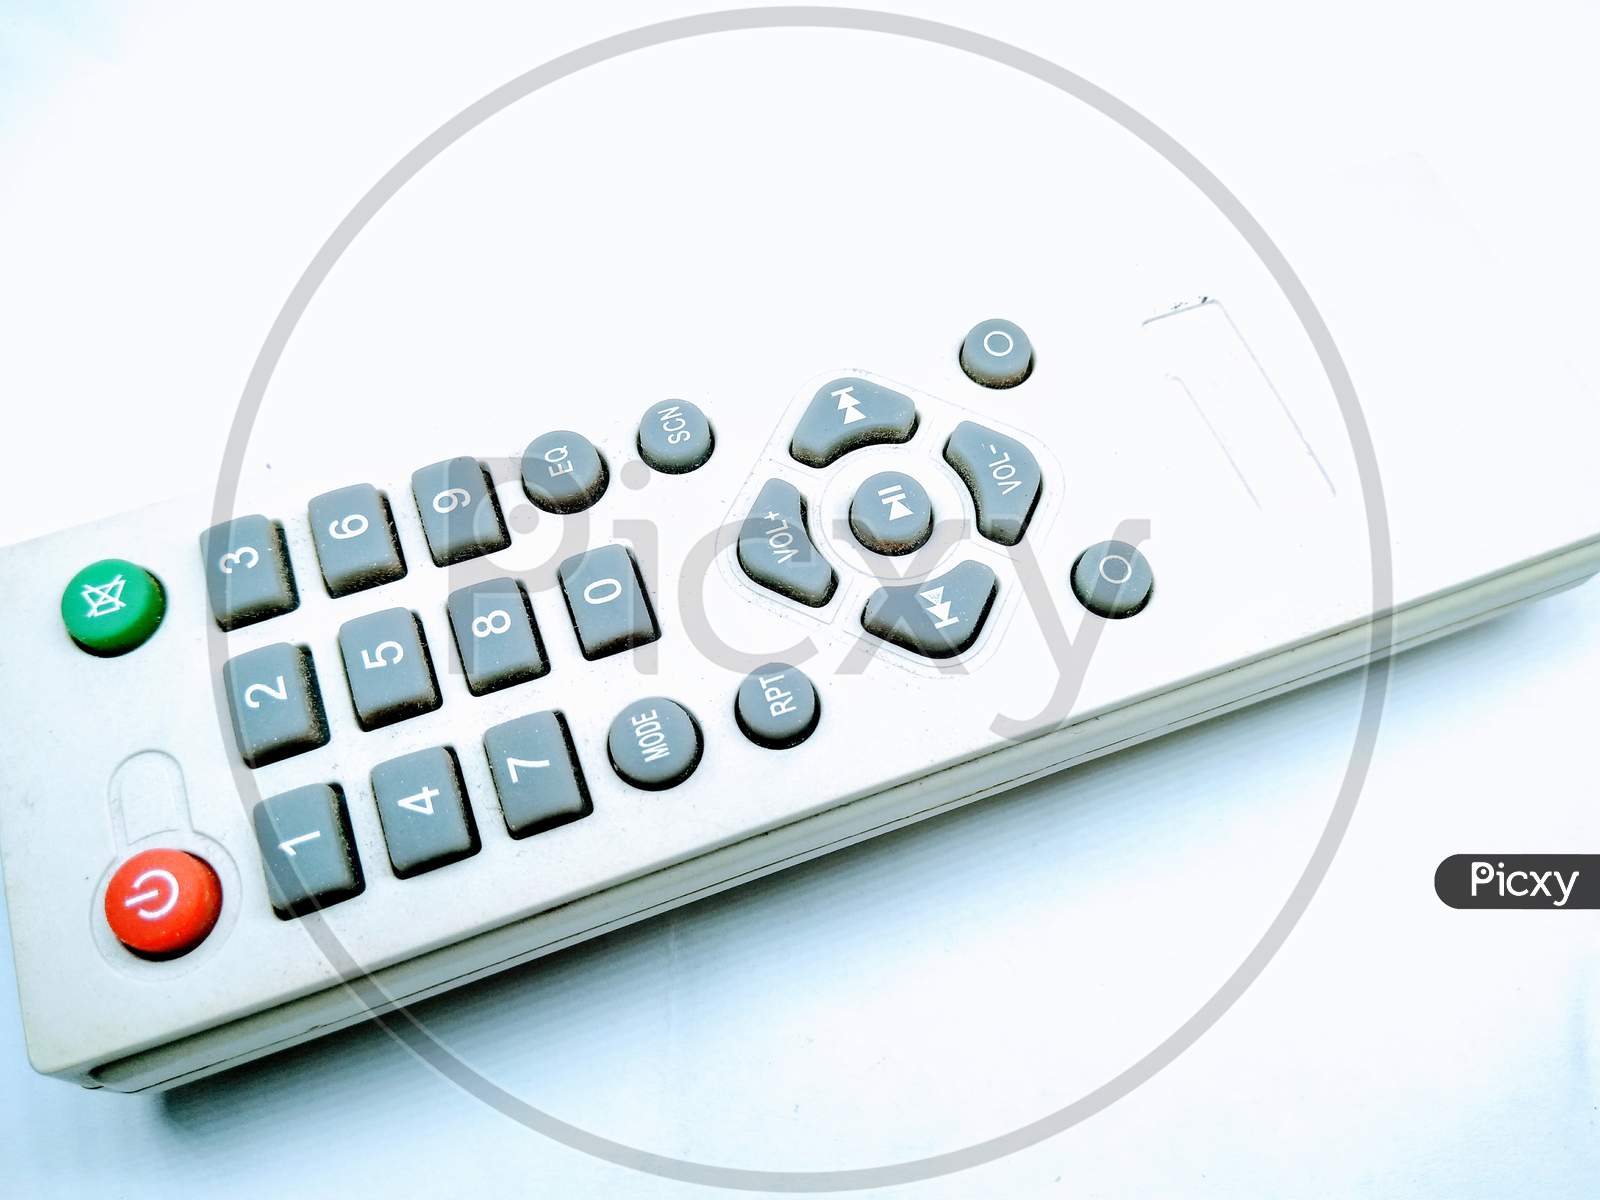 A picture of remote with white background